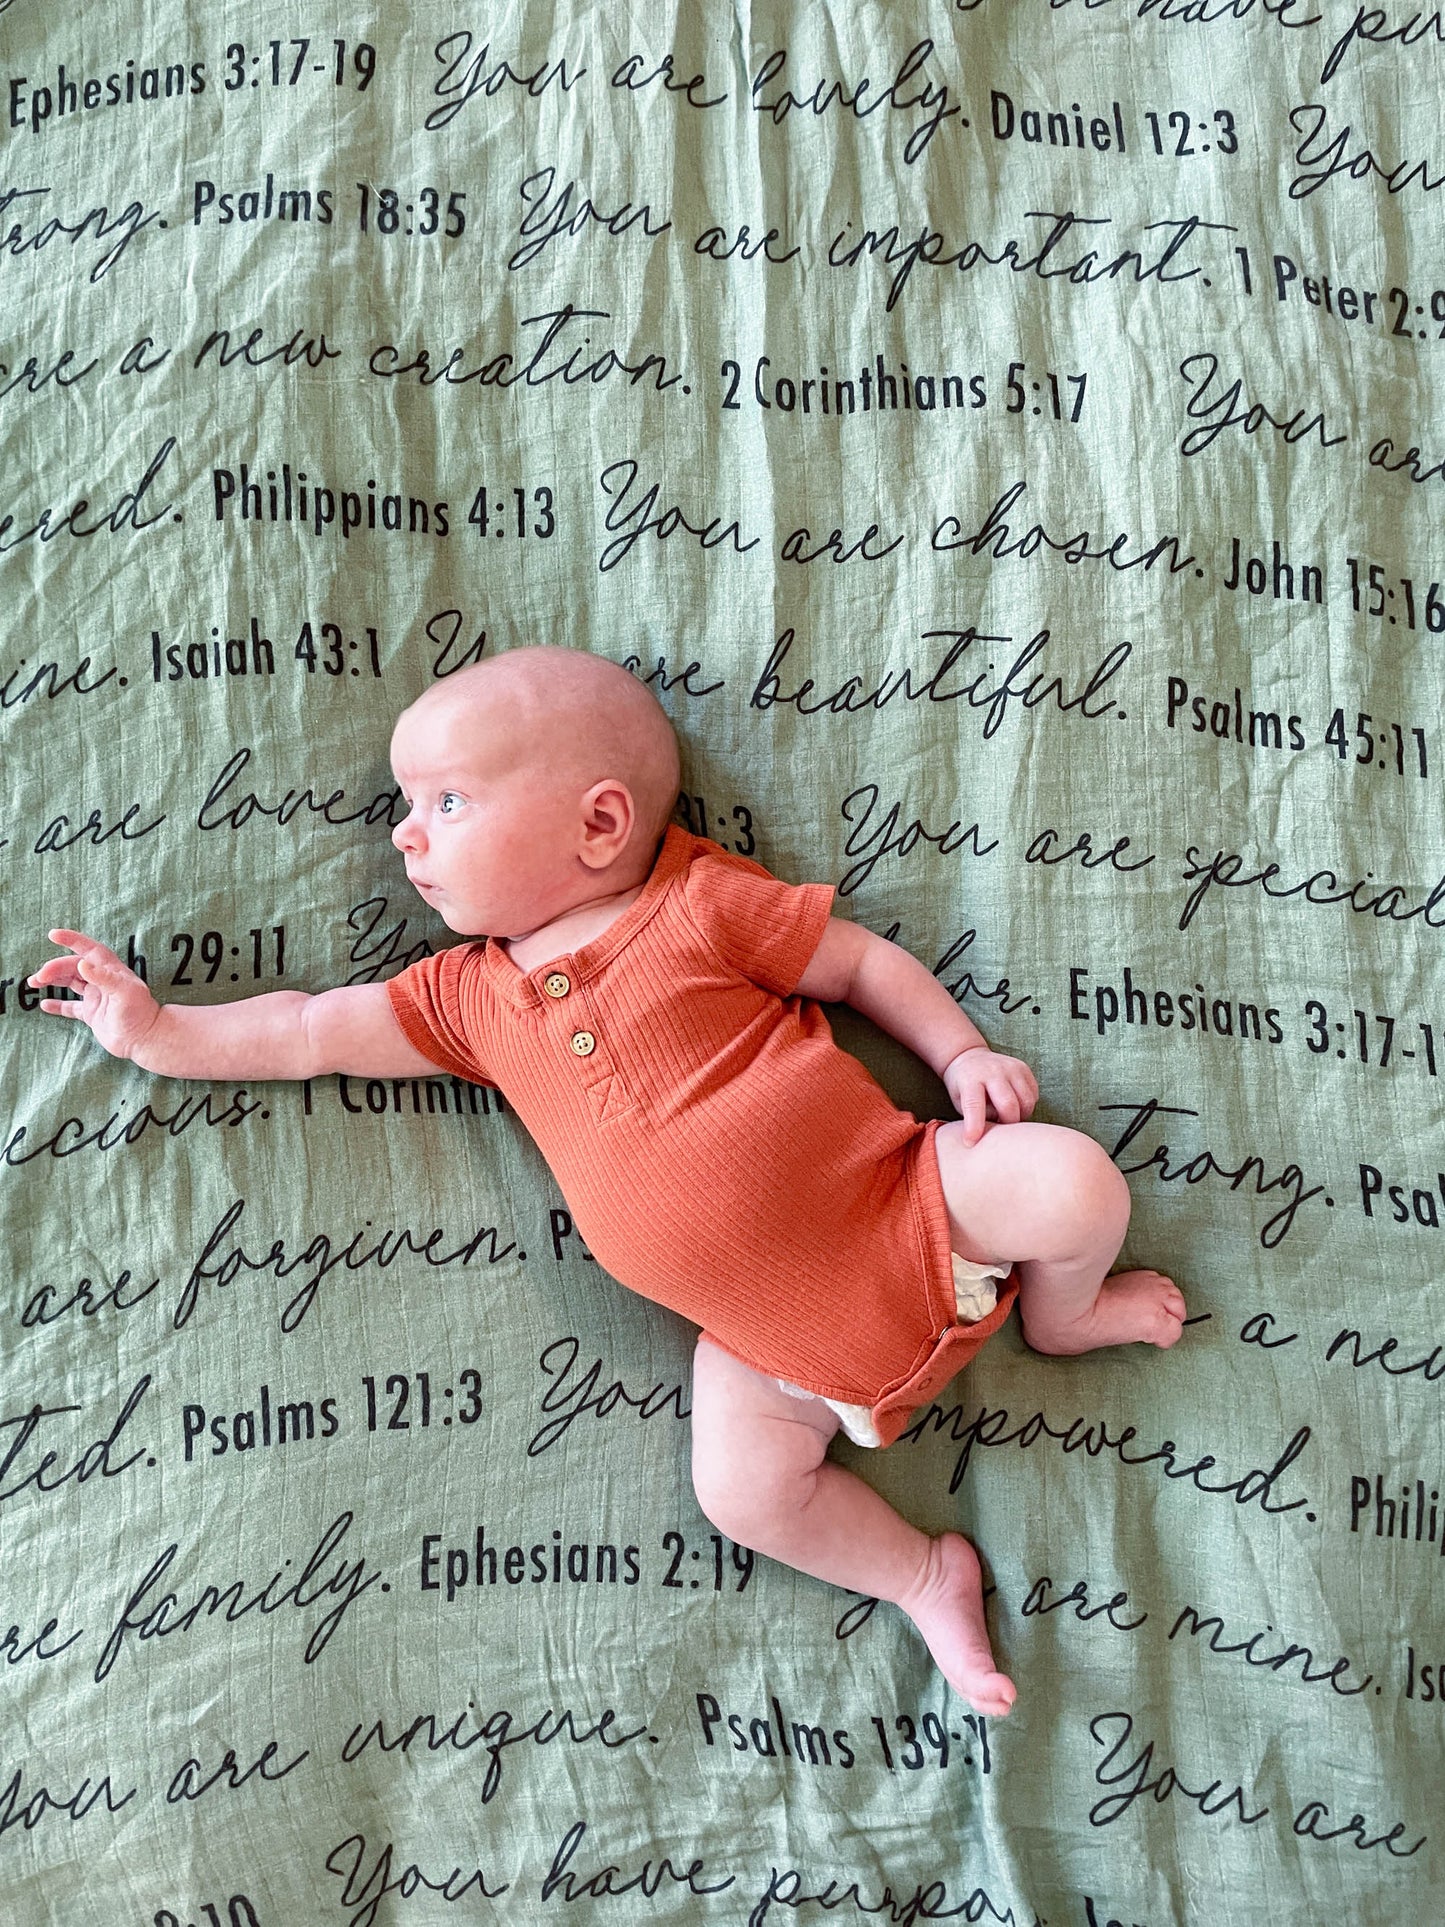 You Are Mine | Muslin Swaddle Blanket | Sage Green